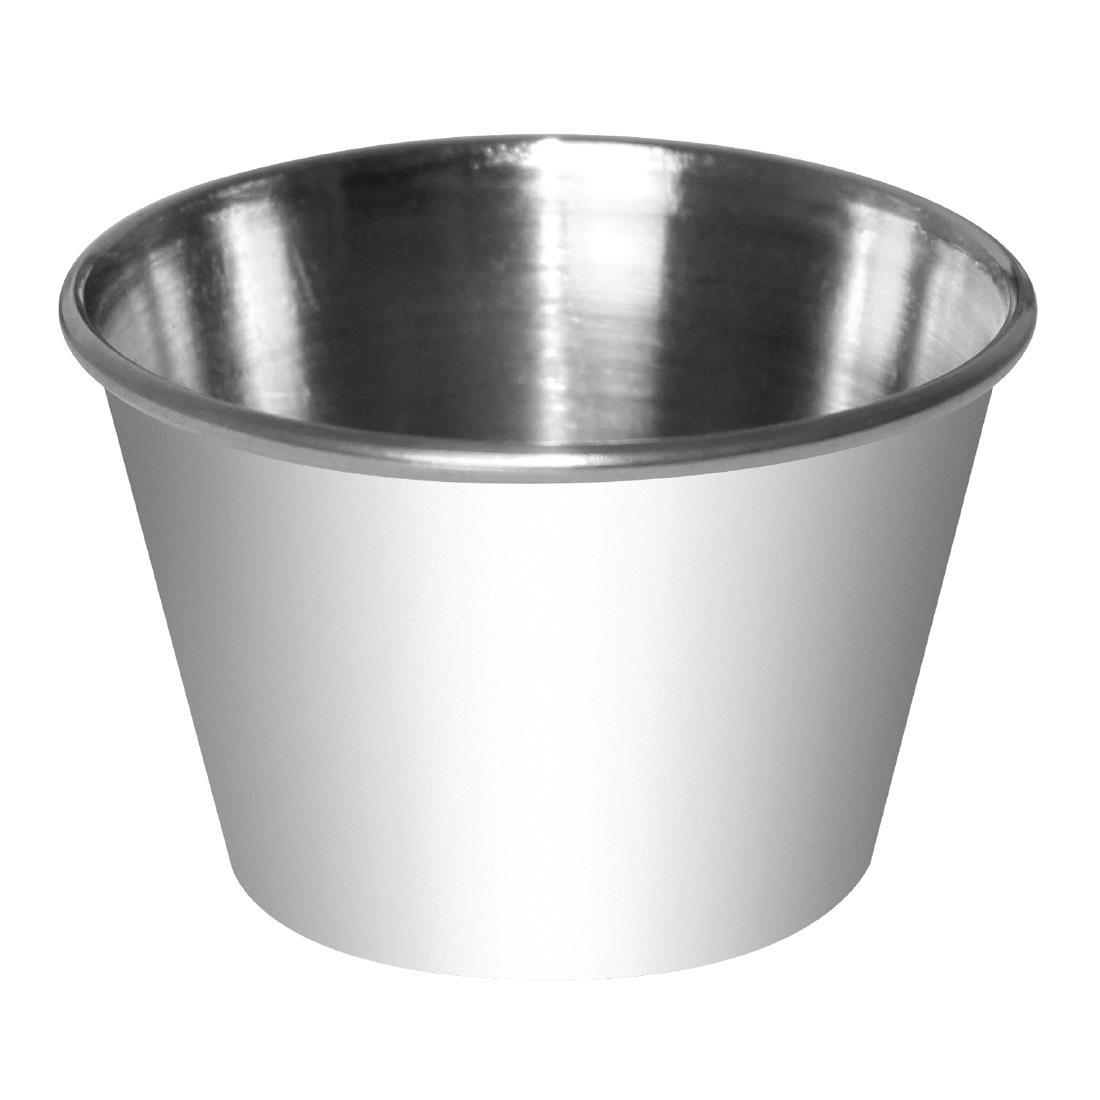 Dipping Pot Stainless Steel 230ml (Pack of 12) - CD478  - 1